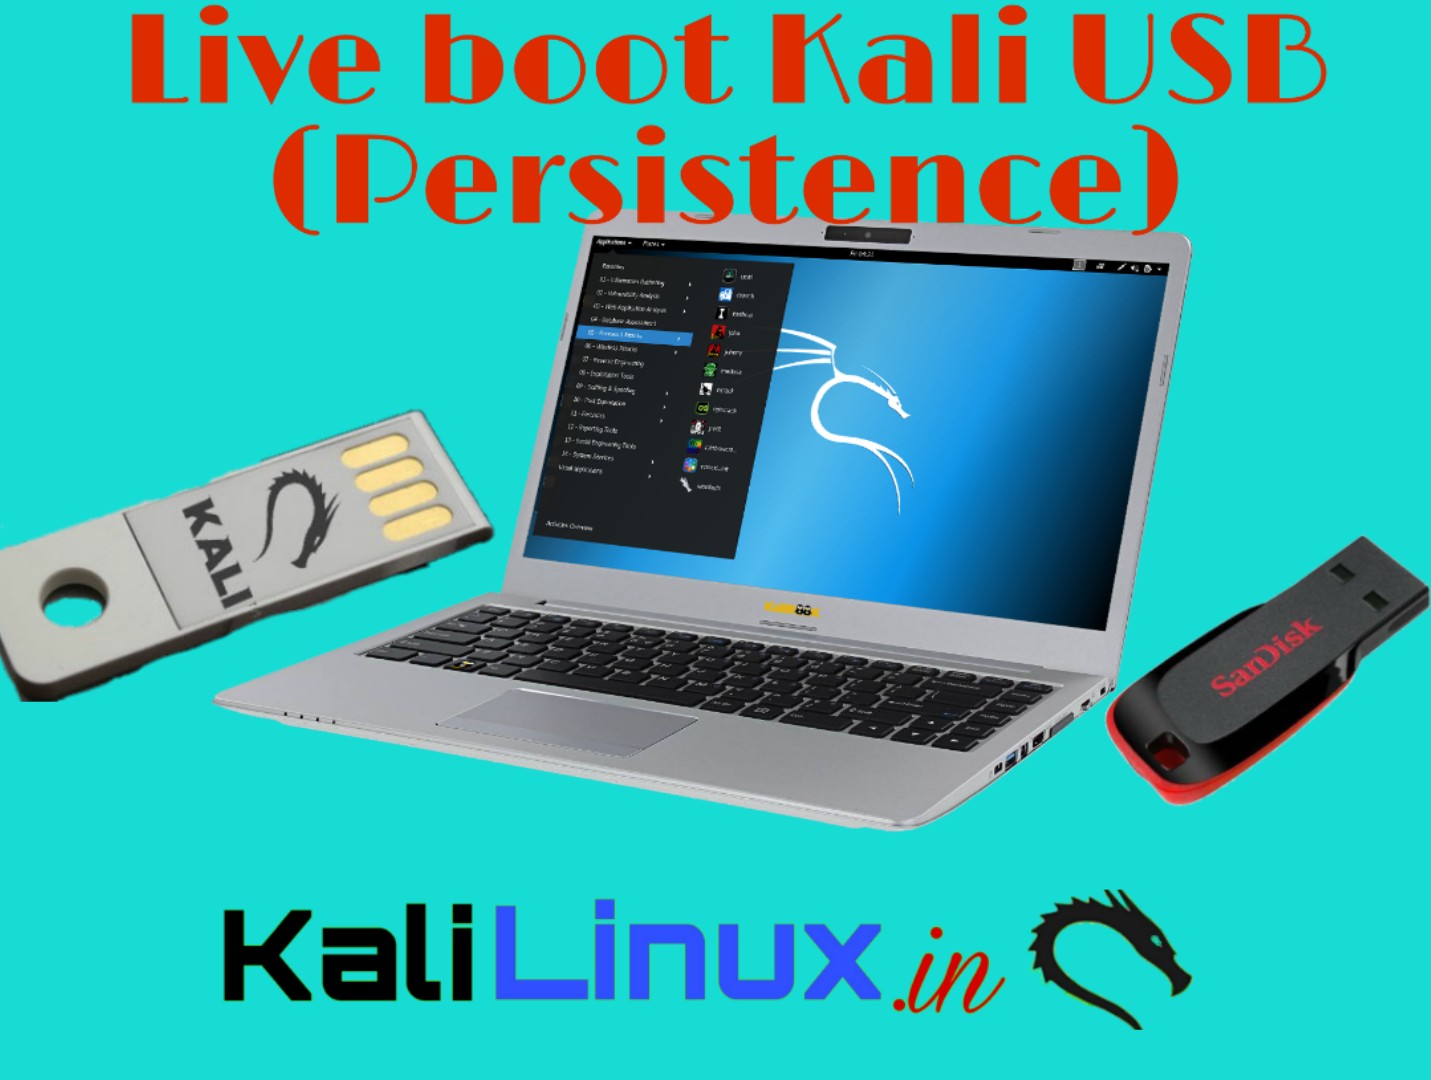 Making a Live bootable Kali Linux USB Persistence